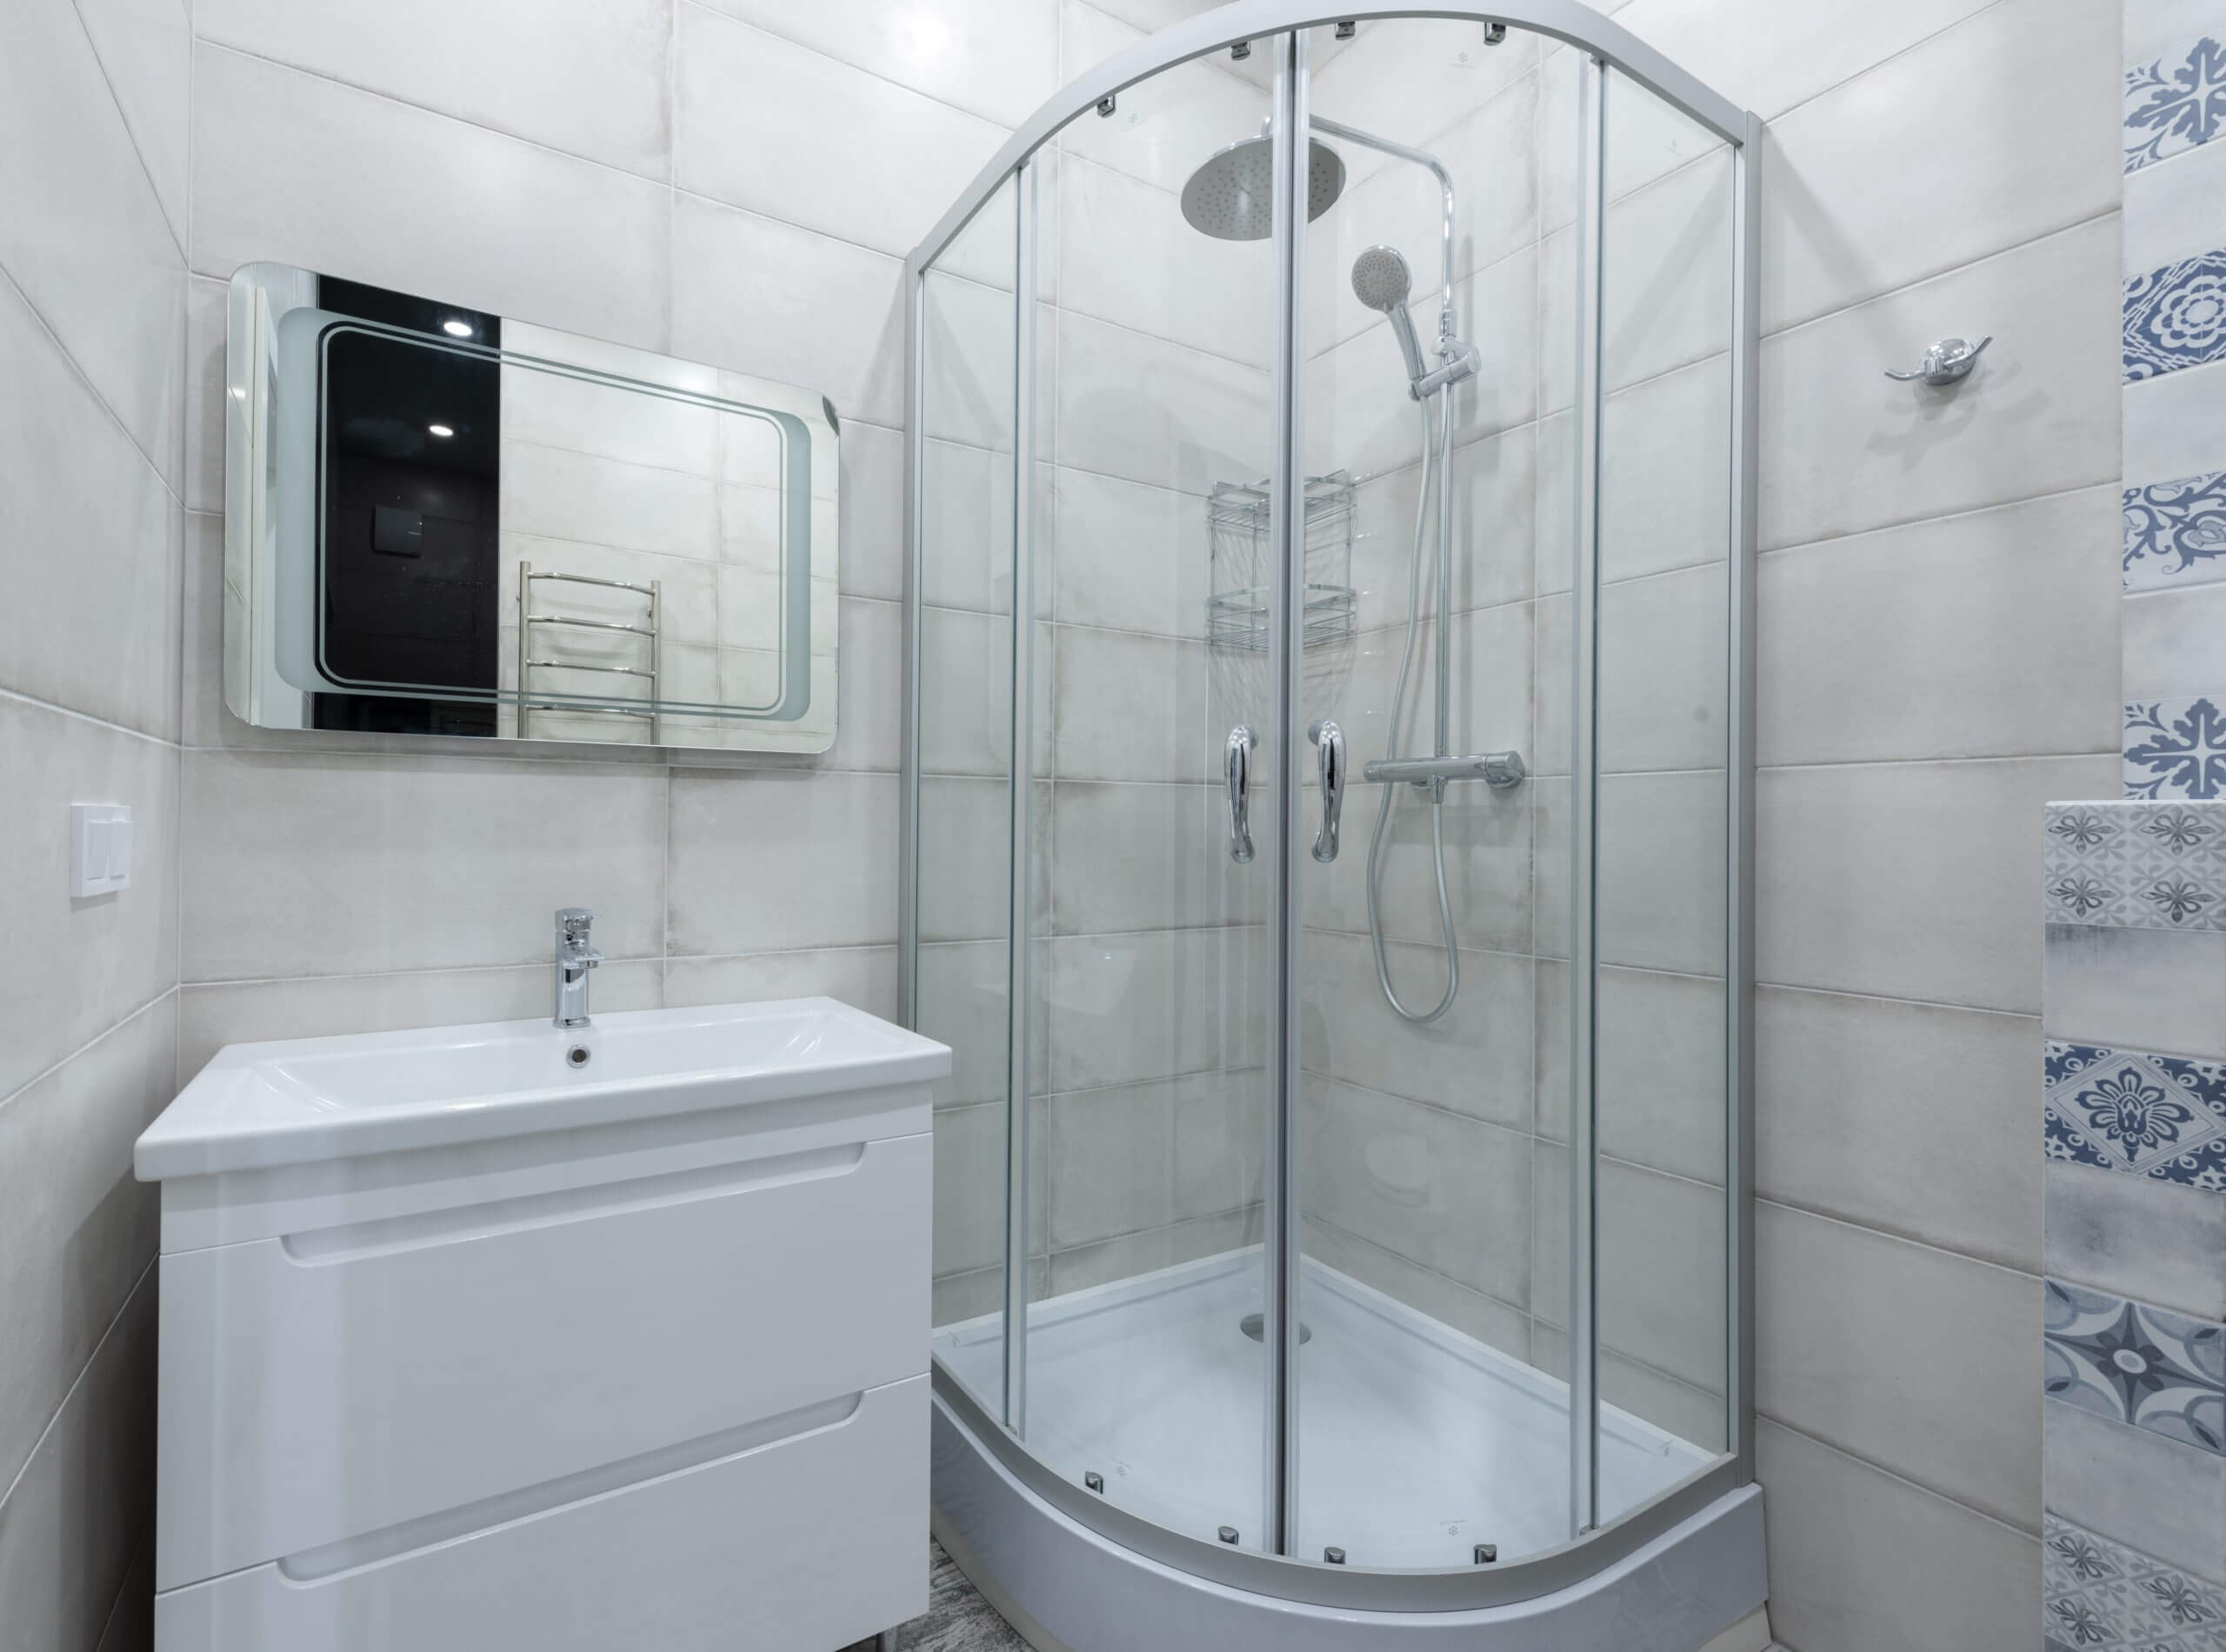 Showers  Walk in showers, Stalls, Corner showers and Enclosures